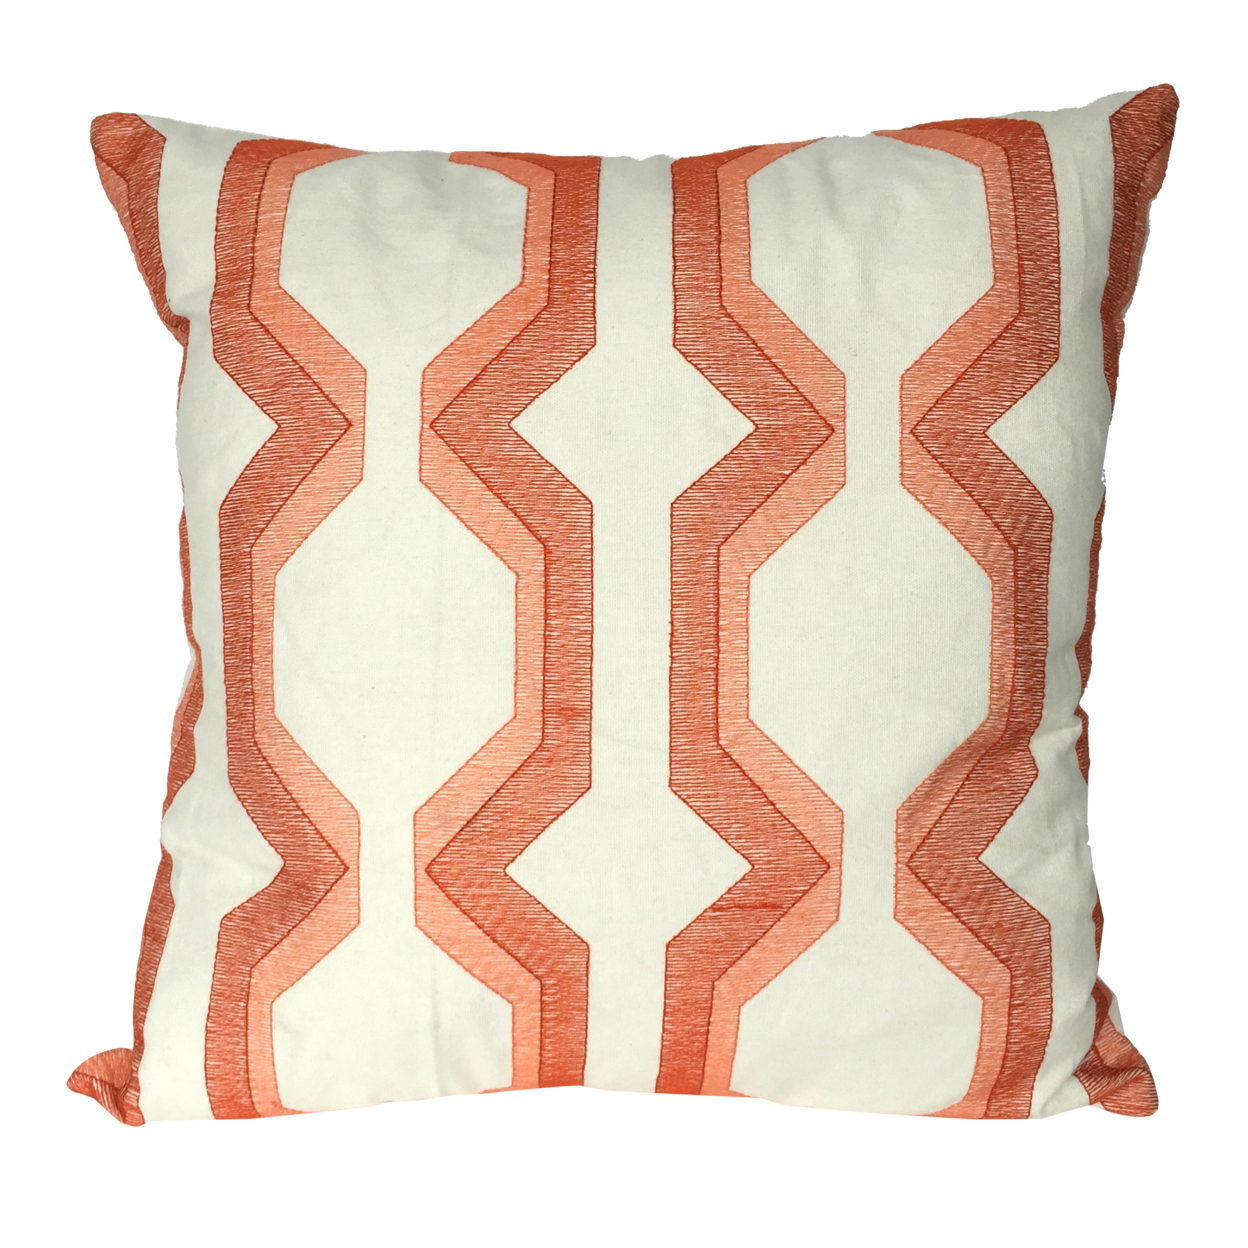 Contemporary Cotton Pillow With Geometric Embroidery, Red And White- Saltoro Sherpi